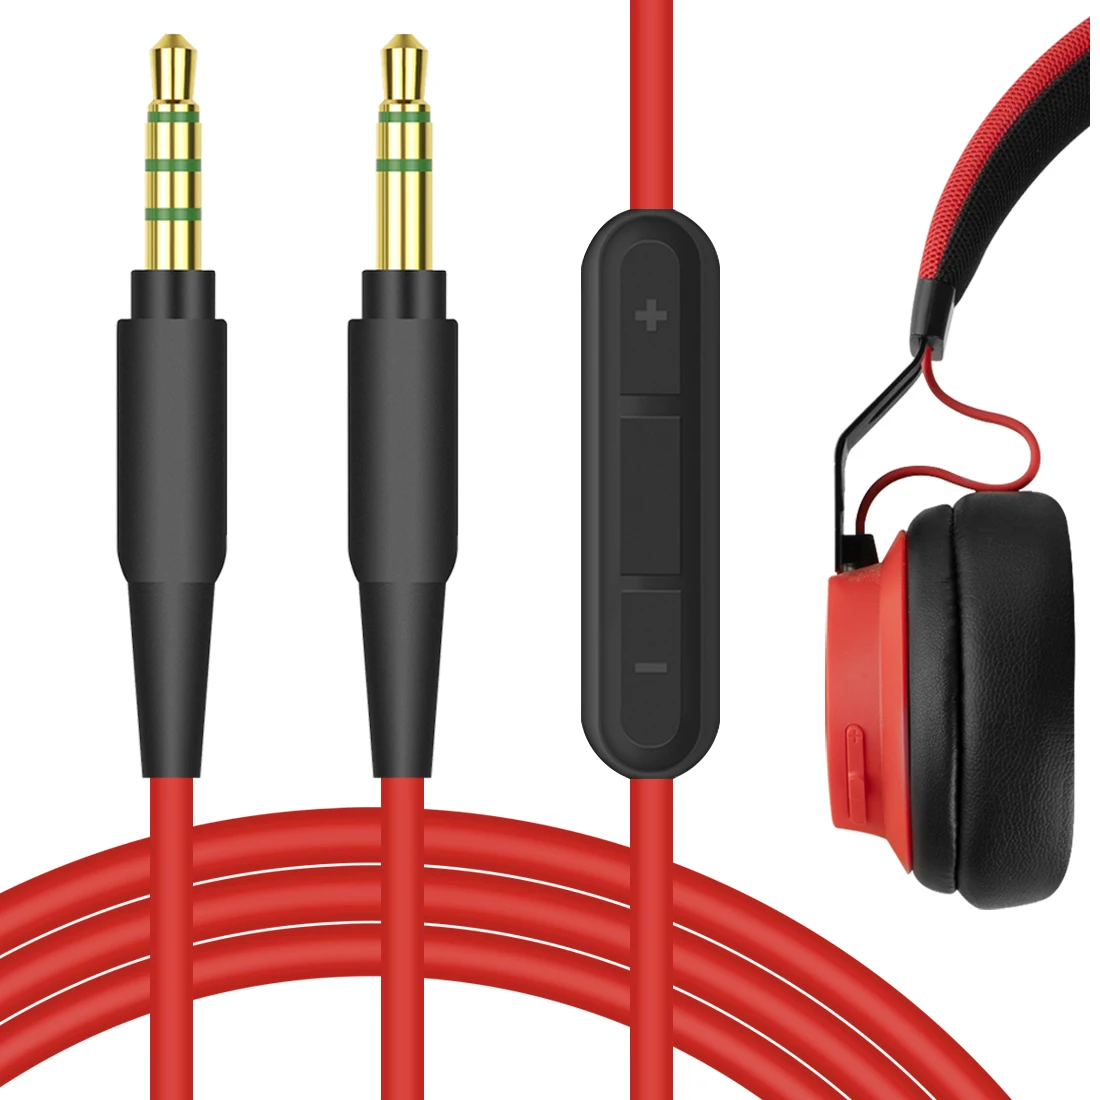 

Geekria Audio Cable With Mic Compatible With Jabra Move, REVO, Elite 85h, Philips SHP9500, X2HR, Fidelio L3, A4216 (6 Ft/1.7 M)